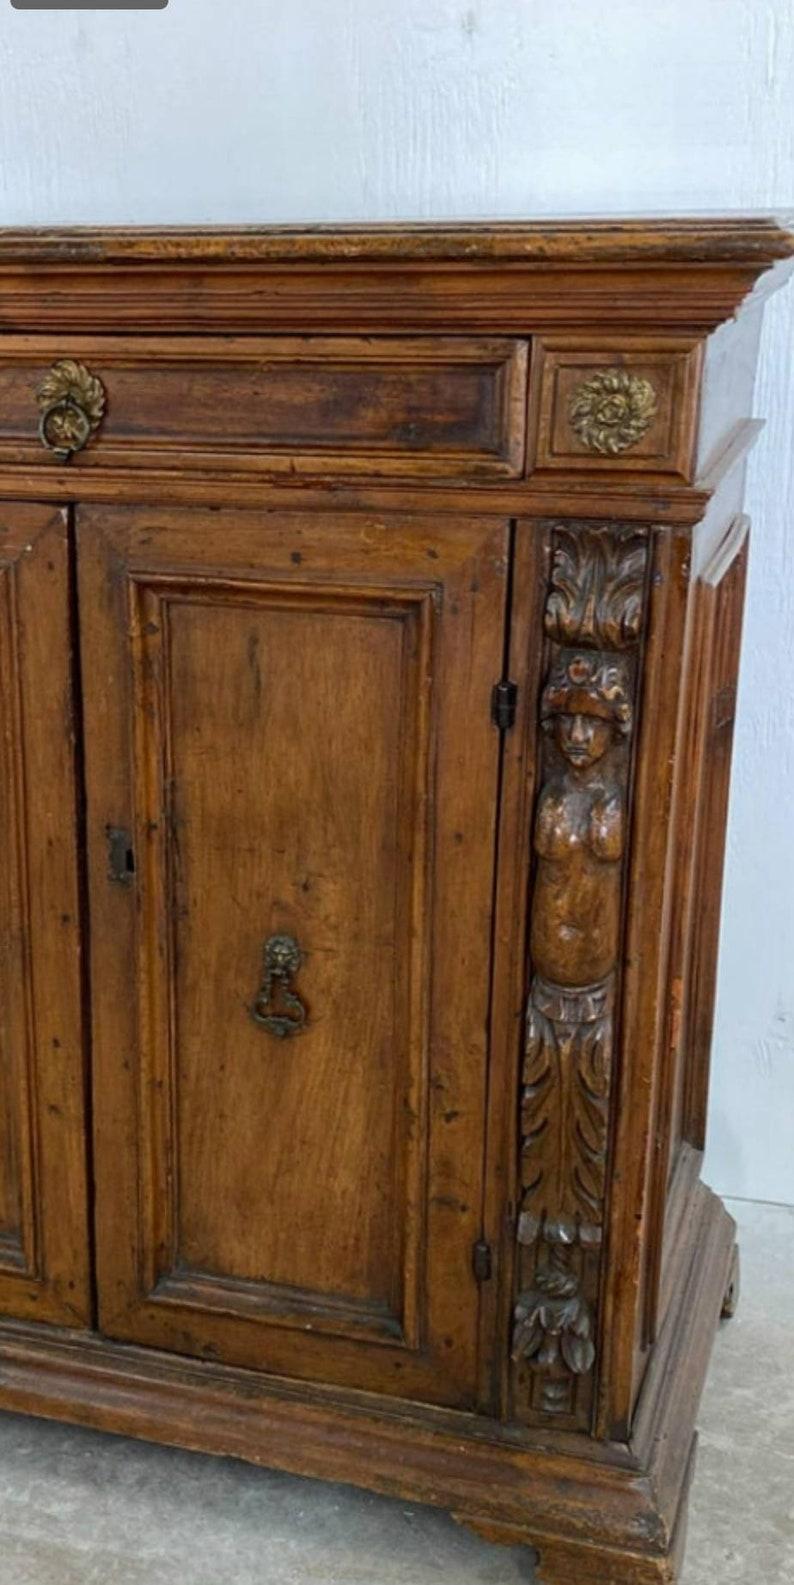 A rare 18th century Italian walnut chest / credenza, Renaissance Period, neoclassical influenced, having two elaborately carved figural statue columns decorated with architectural elements, flanking two cabinet doors, opening to interior fitted with